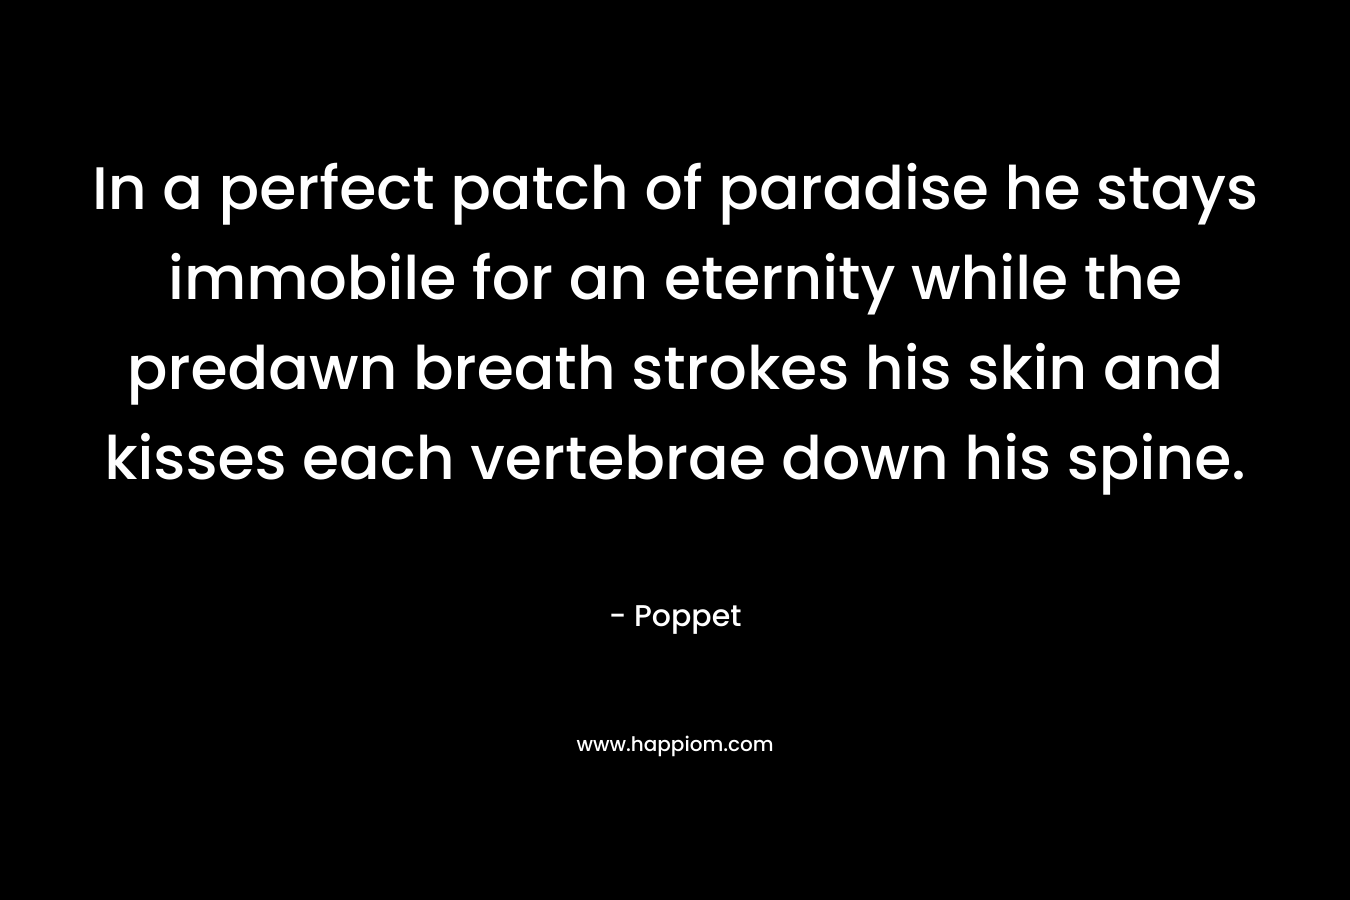 In a perfect patch of paradise he stays immobile for an eternity while the predawn breath strokes his skin and kisses each vertebrae down his spine. – Poppet